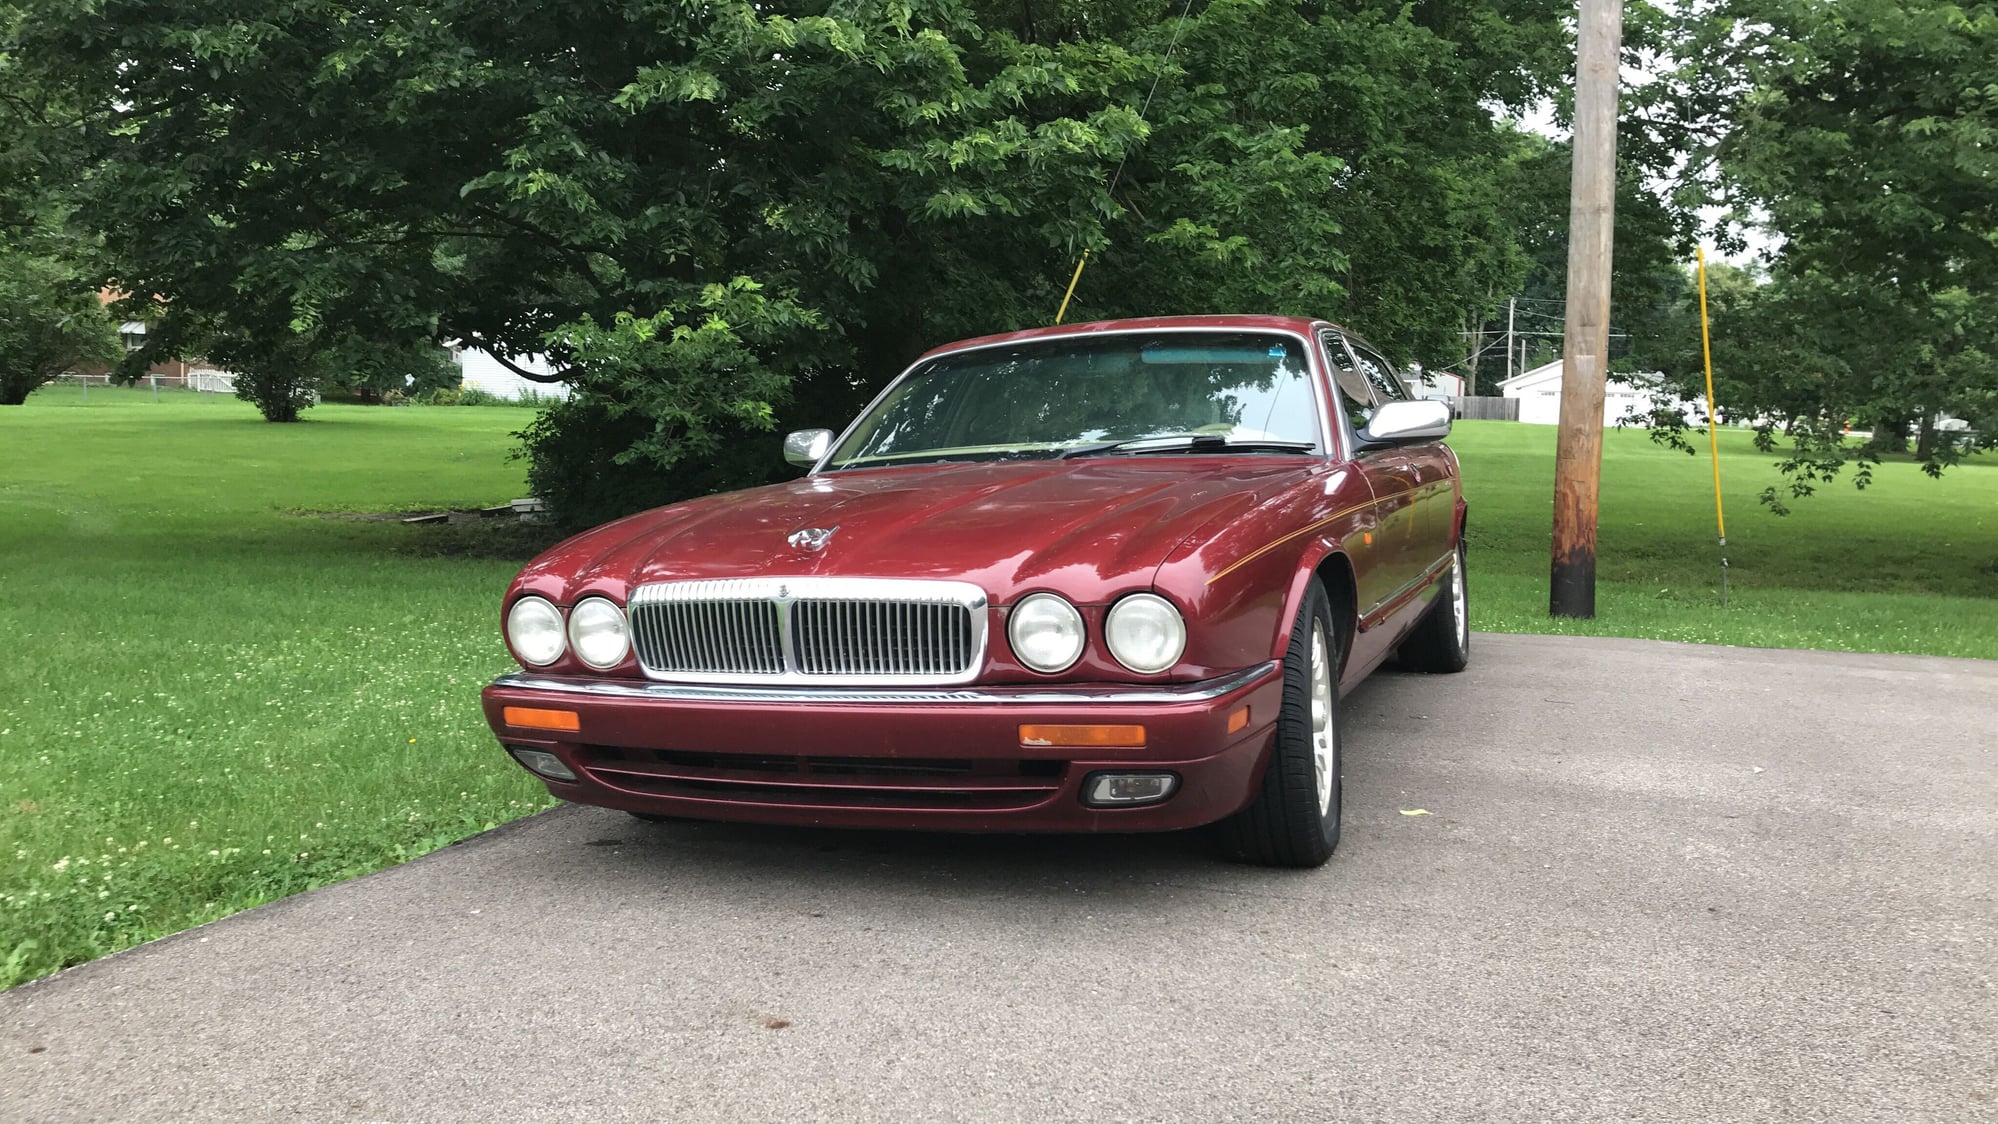 1997 Jaguar Vanden Plas - A good project car or for parts - Used - VIN SAJKX6247VC802186 - 232,000 Miles - 6 cyl - 2WD - Automatic - Sedan - Red - St. Joseph, IL 61873, United States